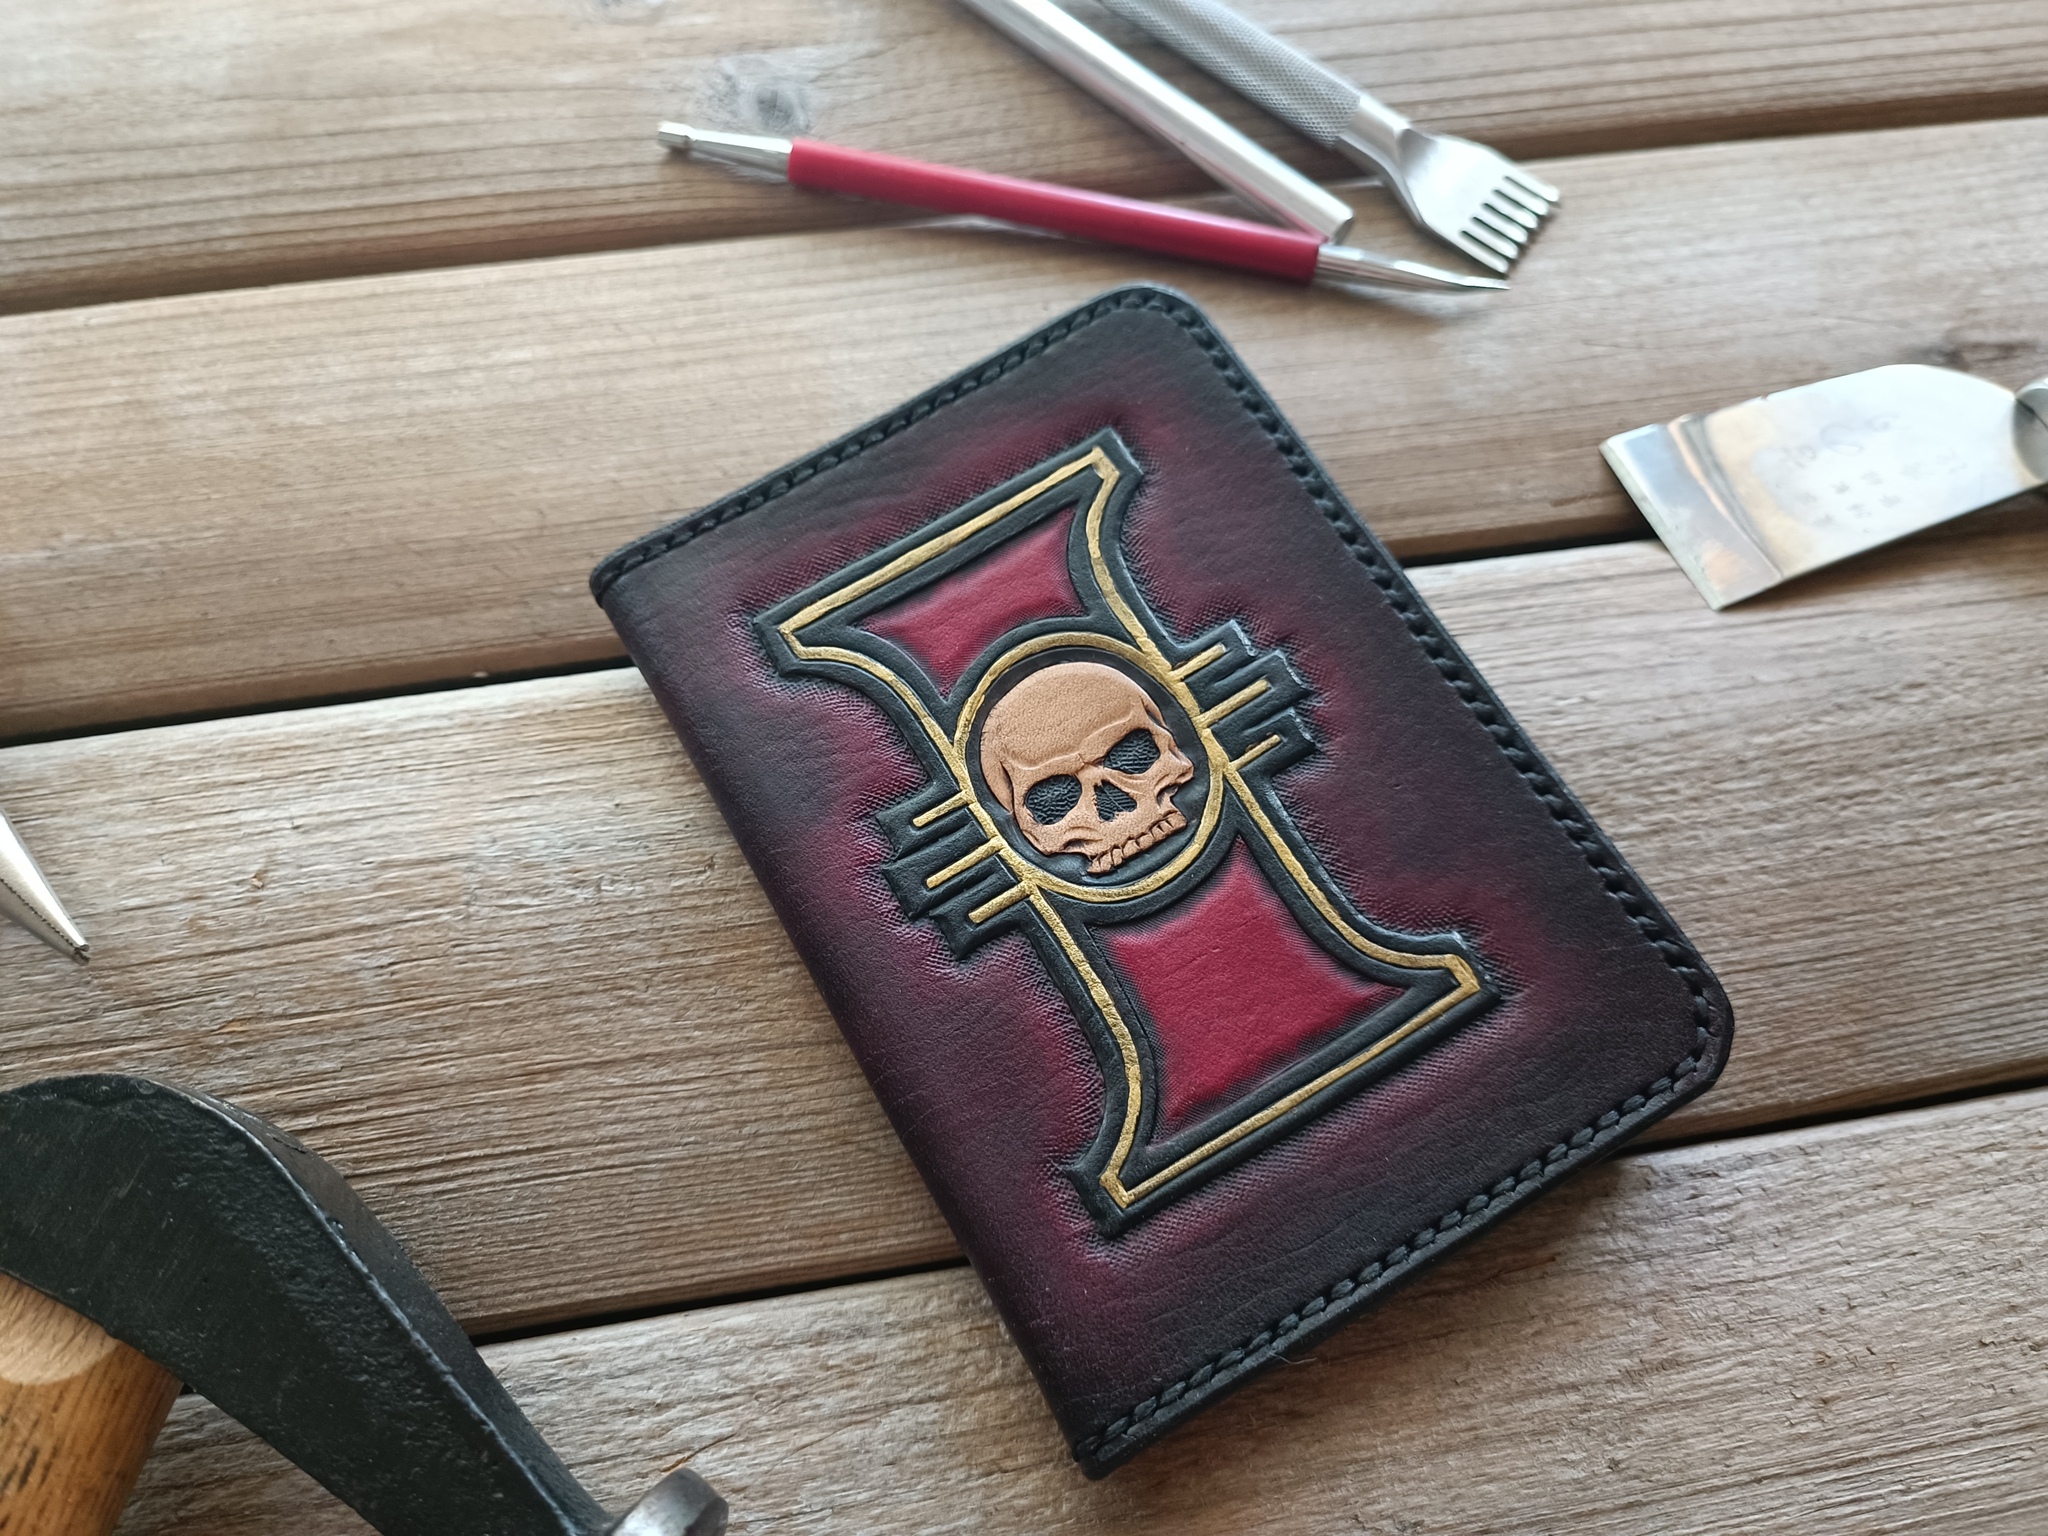 Waha, Valera and all all all - My, Mat, Handmade, Warhammer 40k, Mickey Mouse, Fox, Cover, Leather products, Embossing on leather, Fallout, Natural leather, Longpost